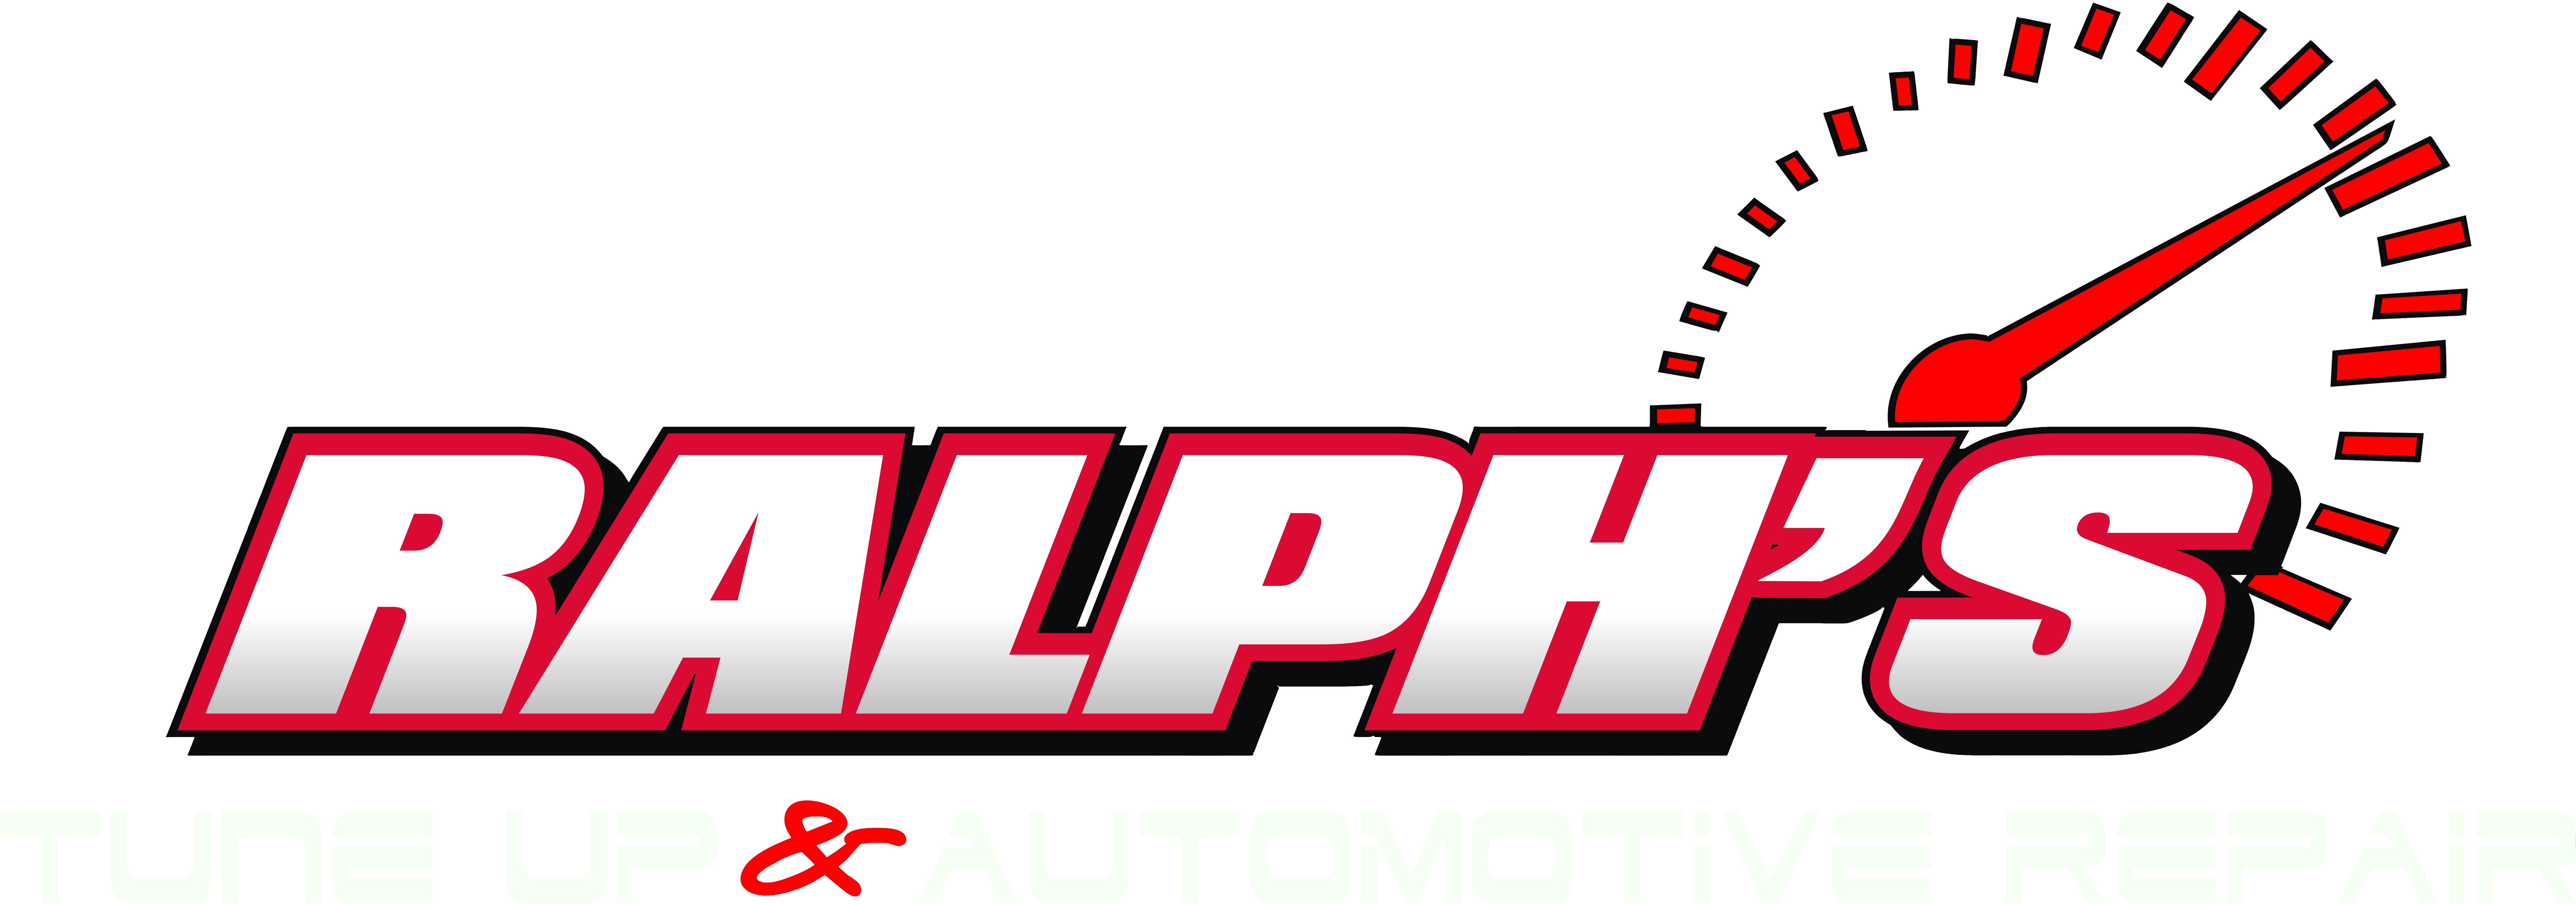 #1 Auto Repair Near Me in Rocky Mount | Ralphs Tune Up and ...